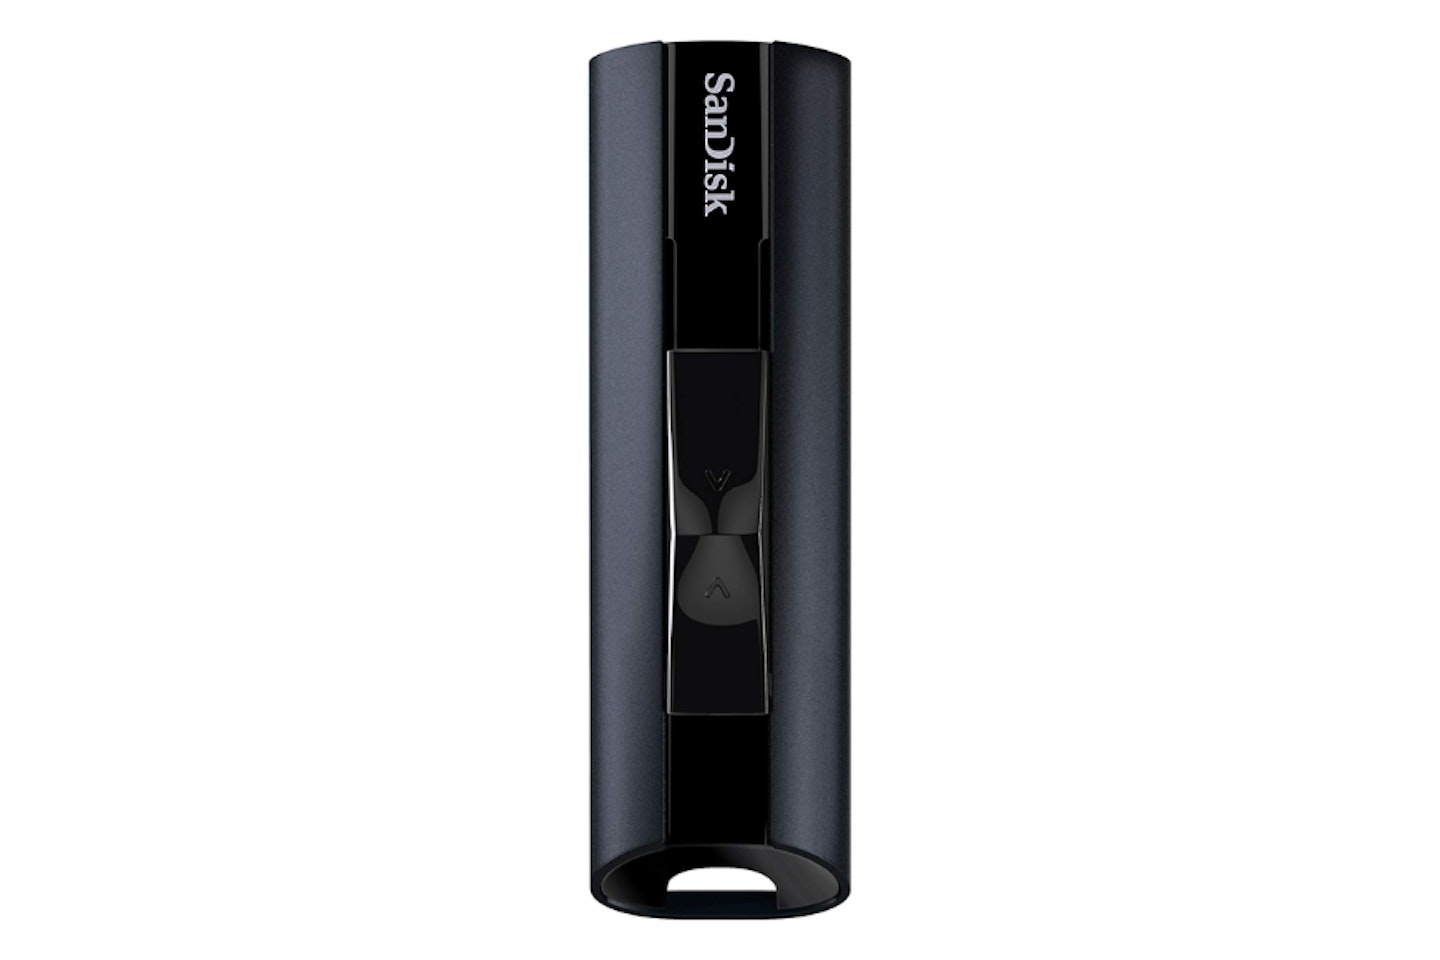 SanDisk 256GB Extreme PRO USB 3.2 Solid State Flash Drive - one of the best SanDisk USB stick devices